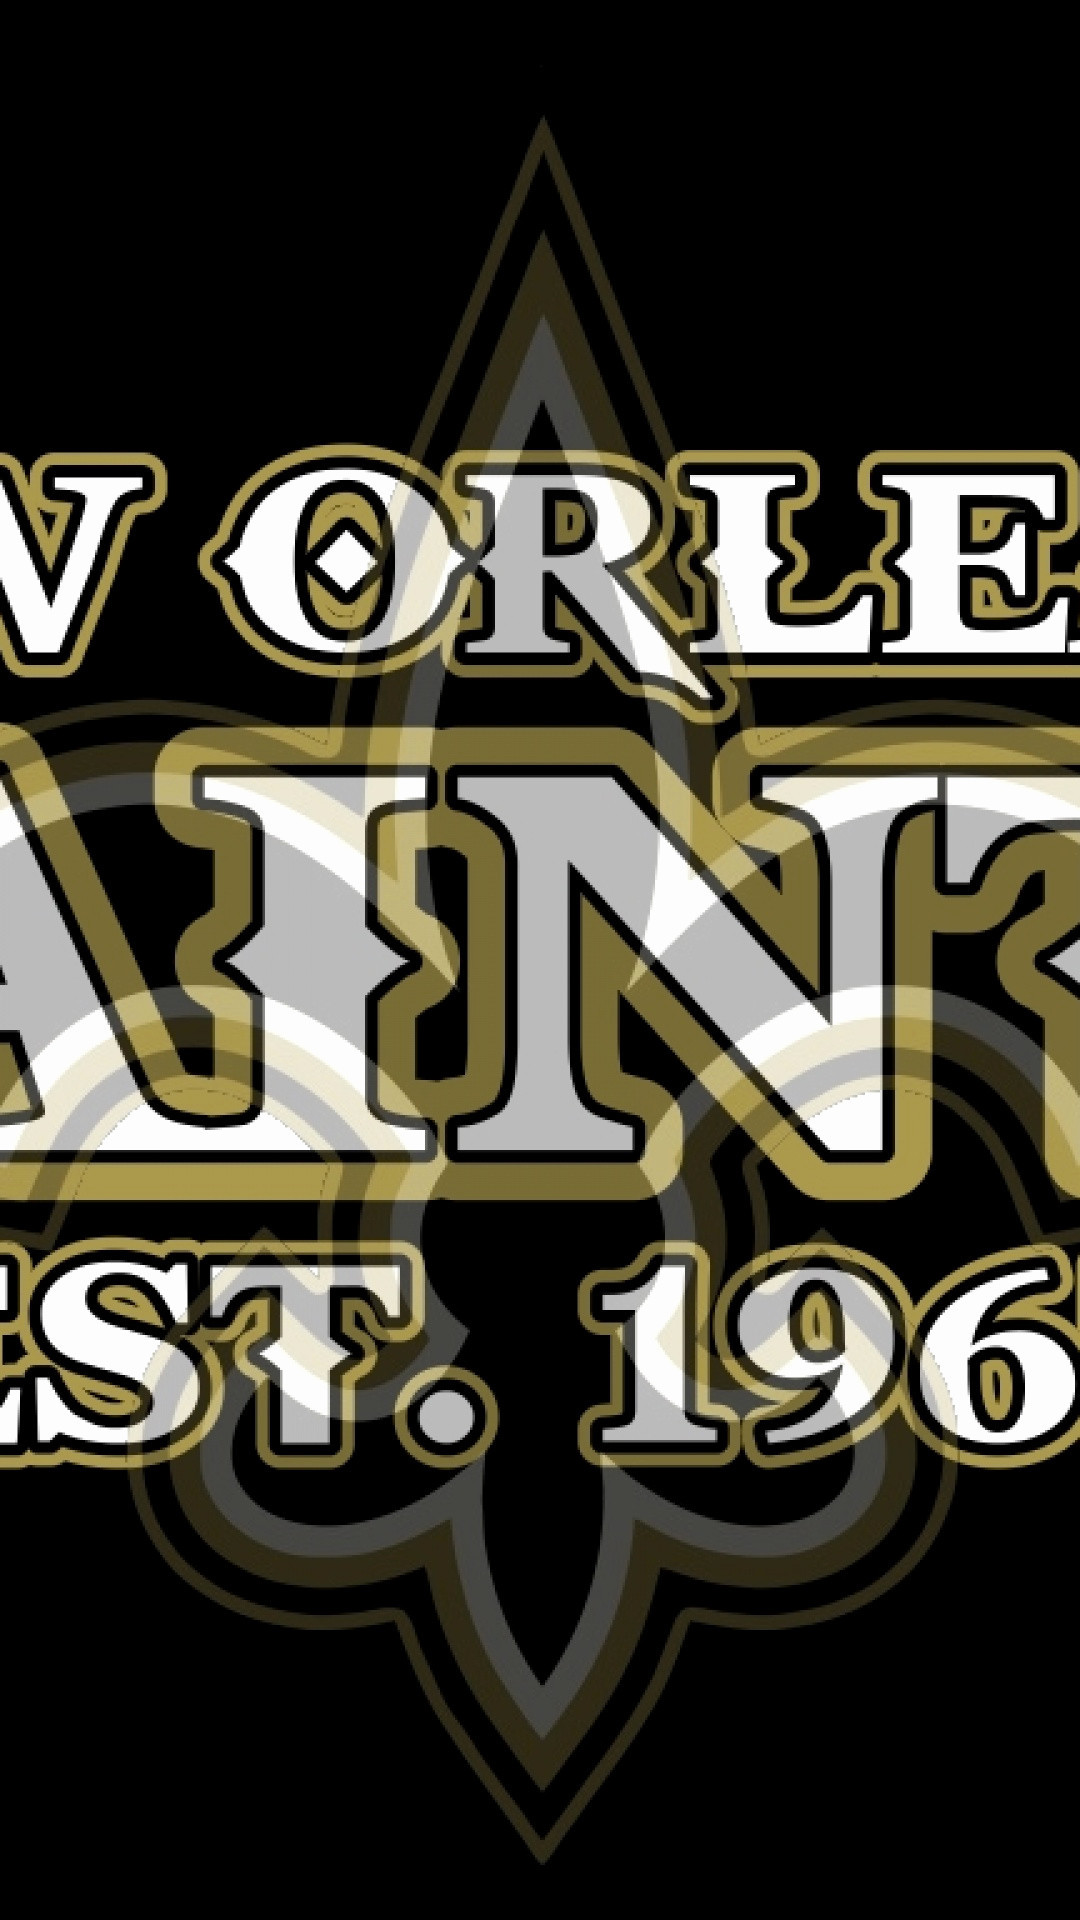 1080x1920 1920x1080 New Orleans Saints Wallpapers for iPad